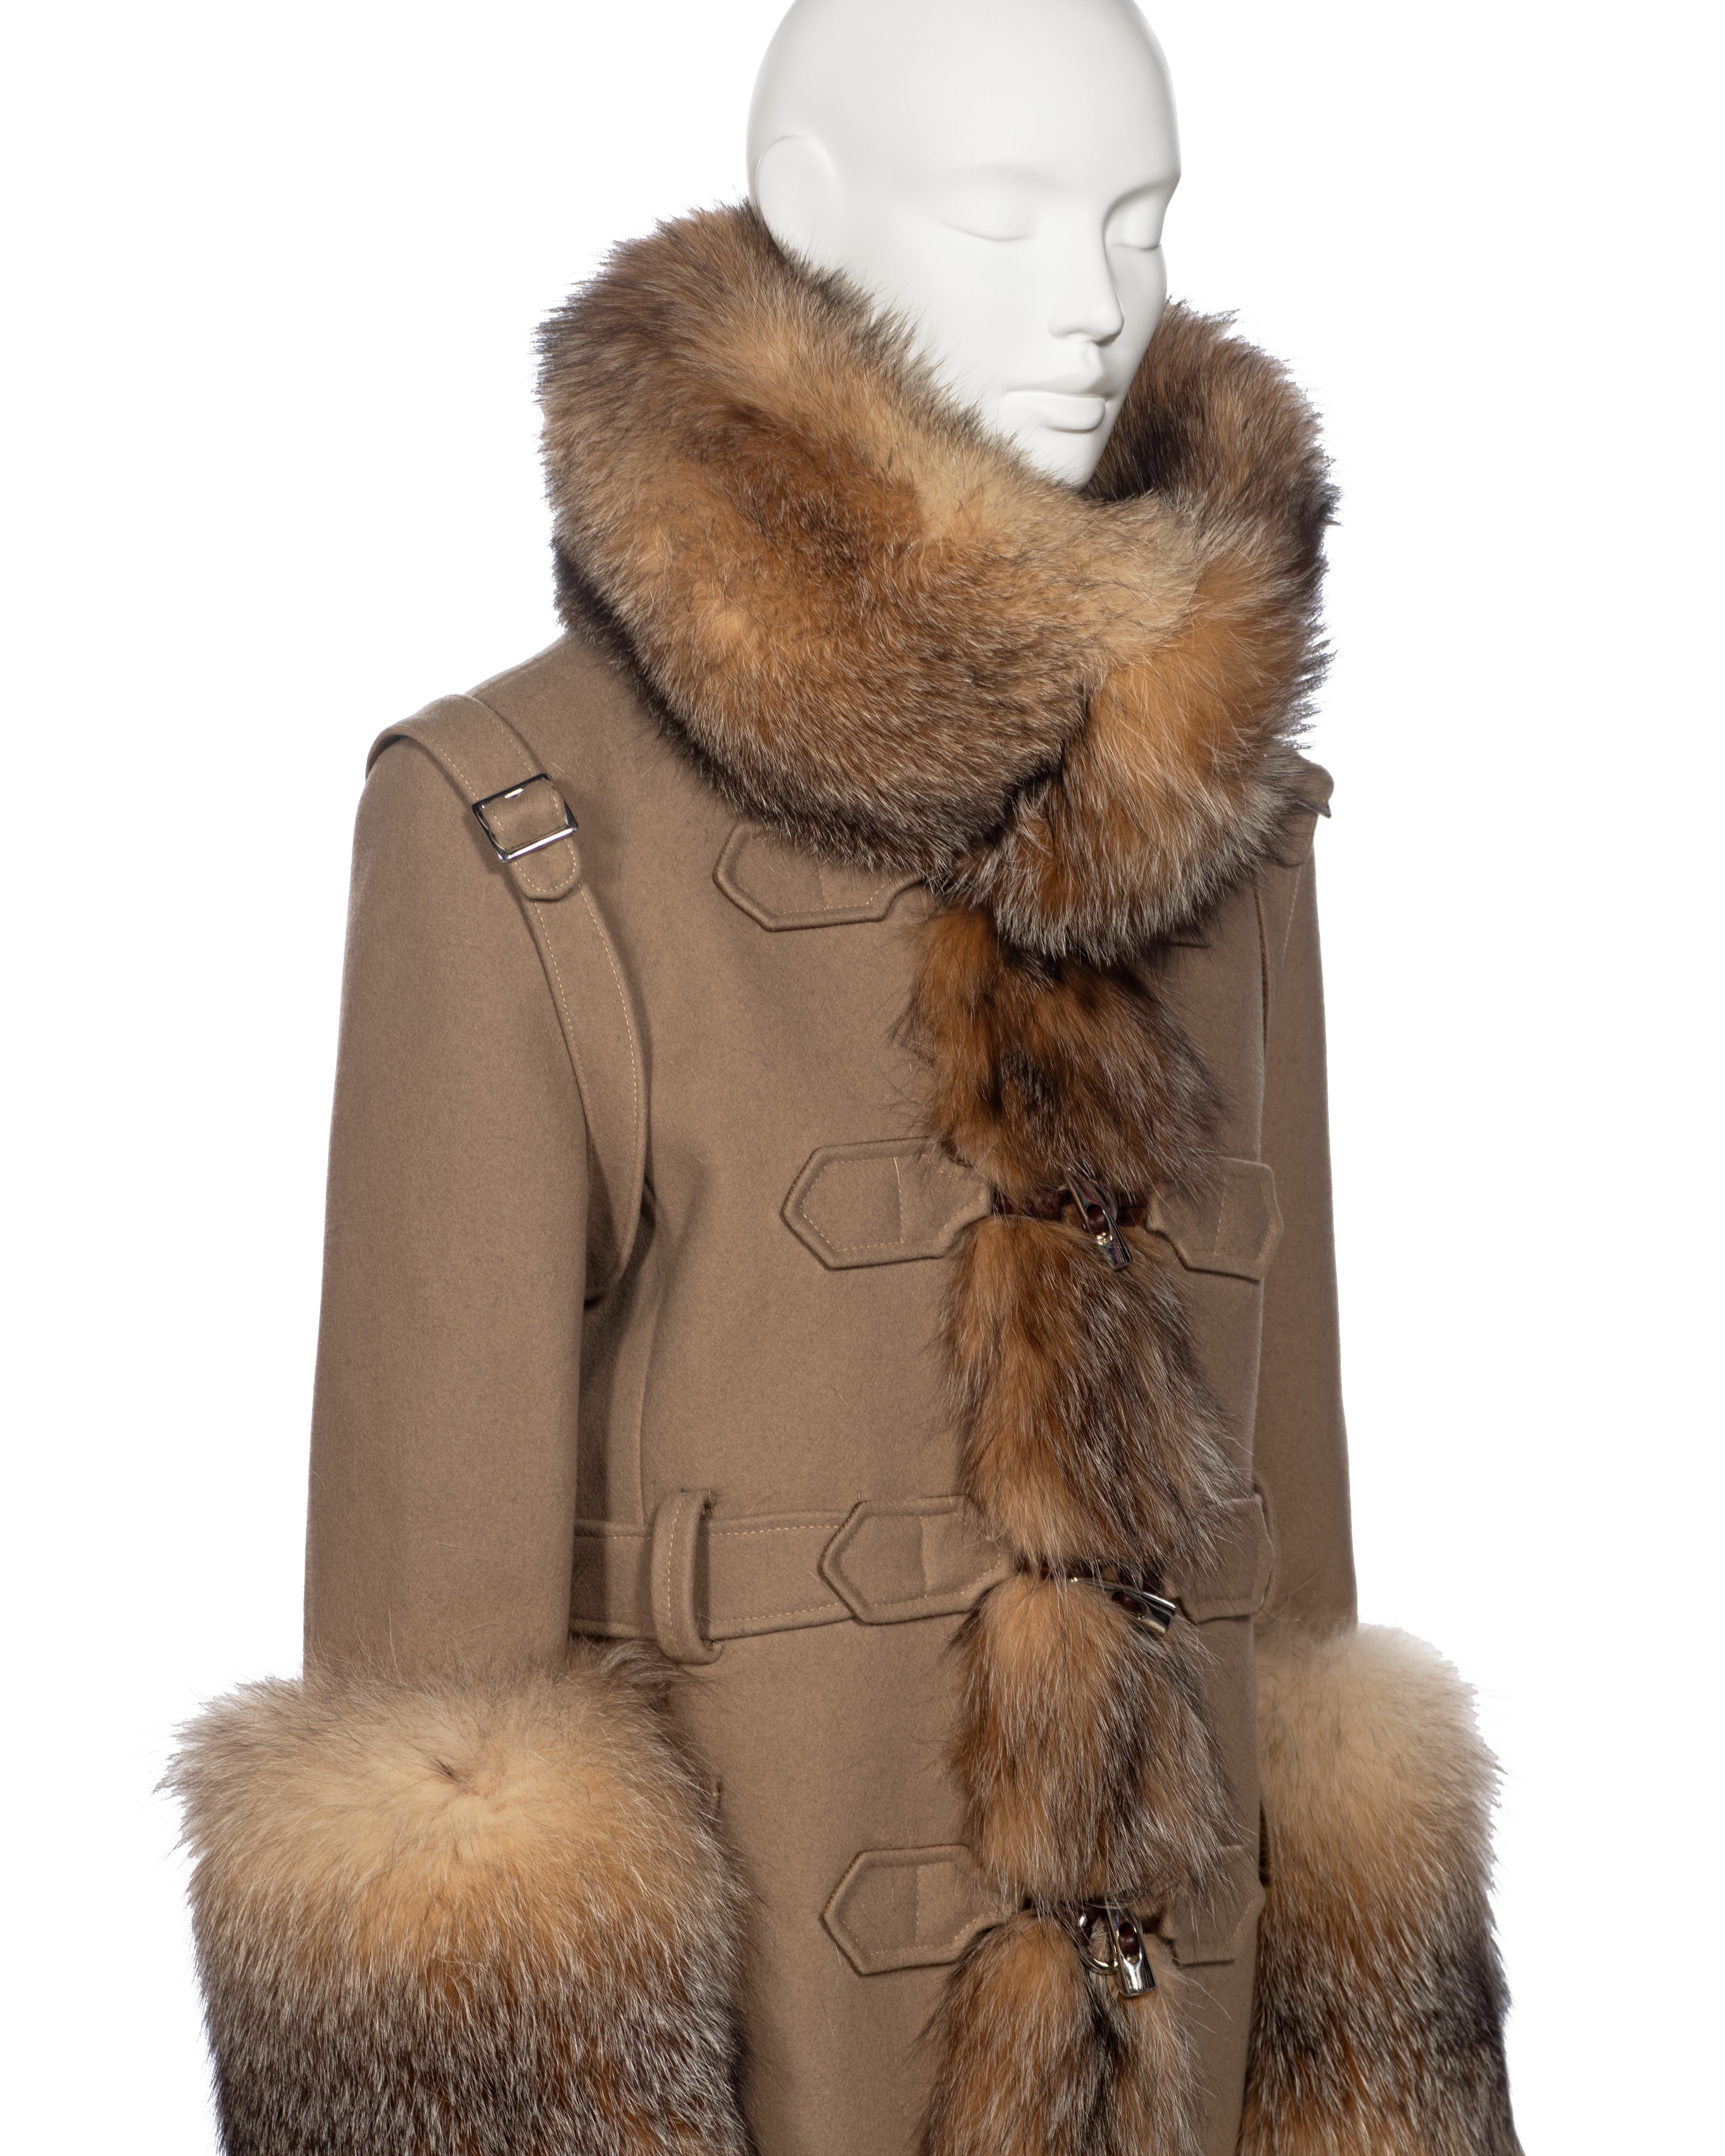 Balenciaga by Nicolas Ghesquière Fur-Trimmed Felted Wool Duffle Coat, fw 2005 For Sale 4